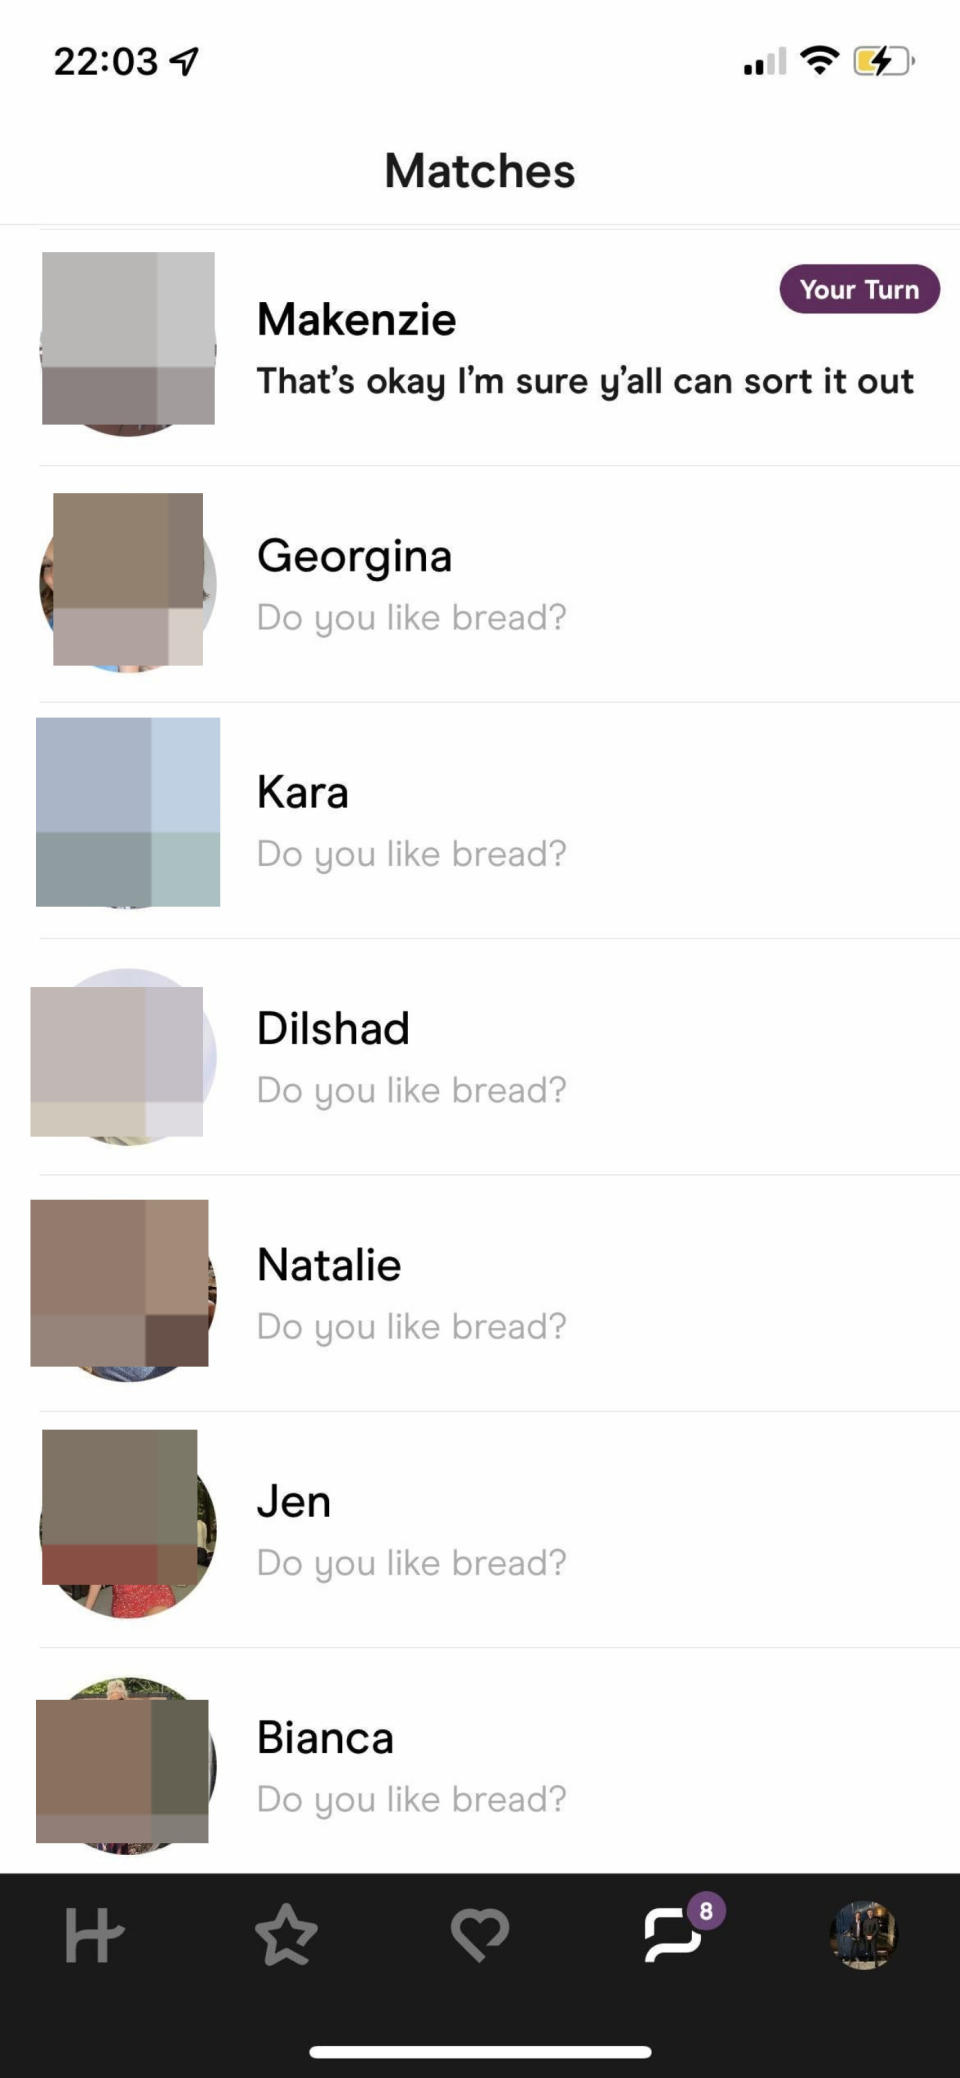 Every match being asked. Do you like bread?